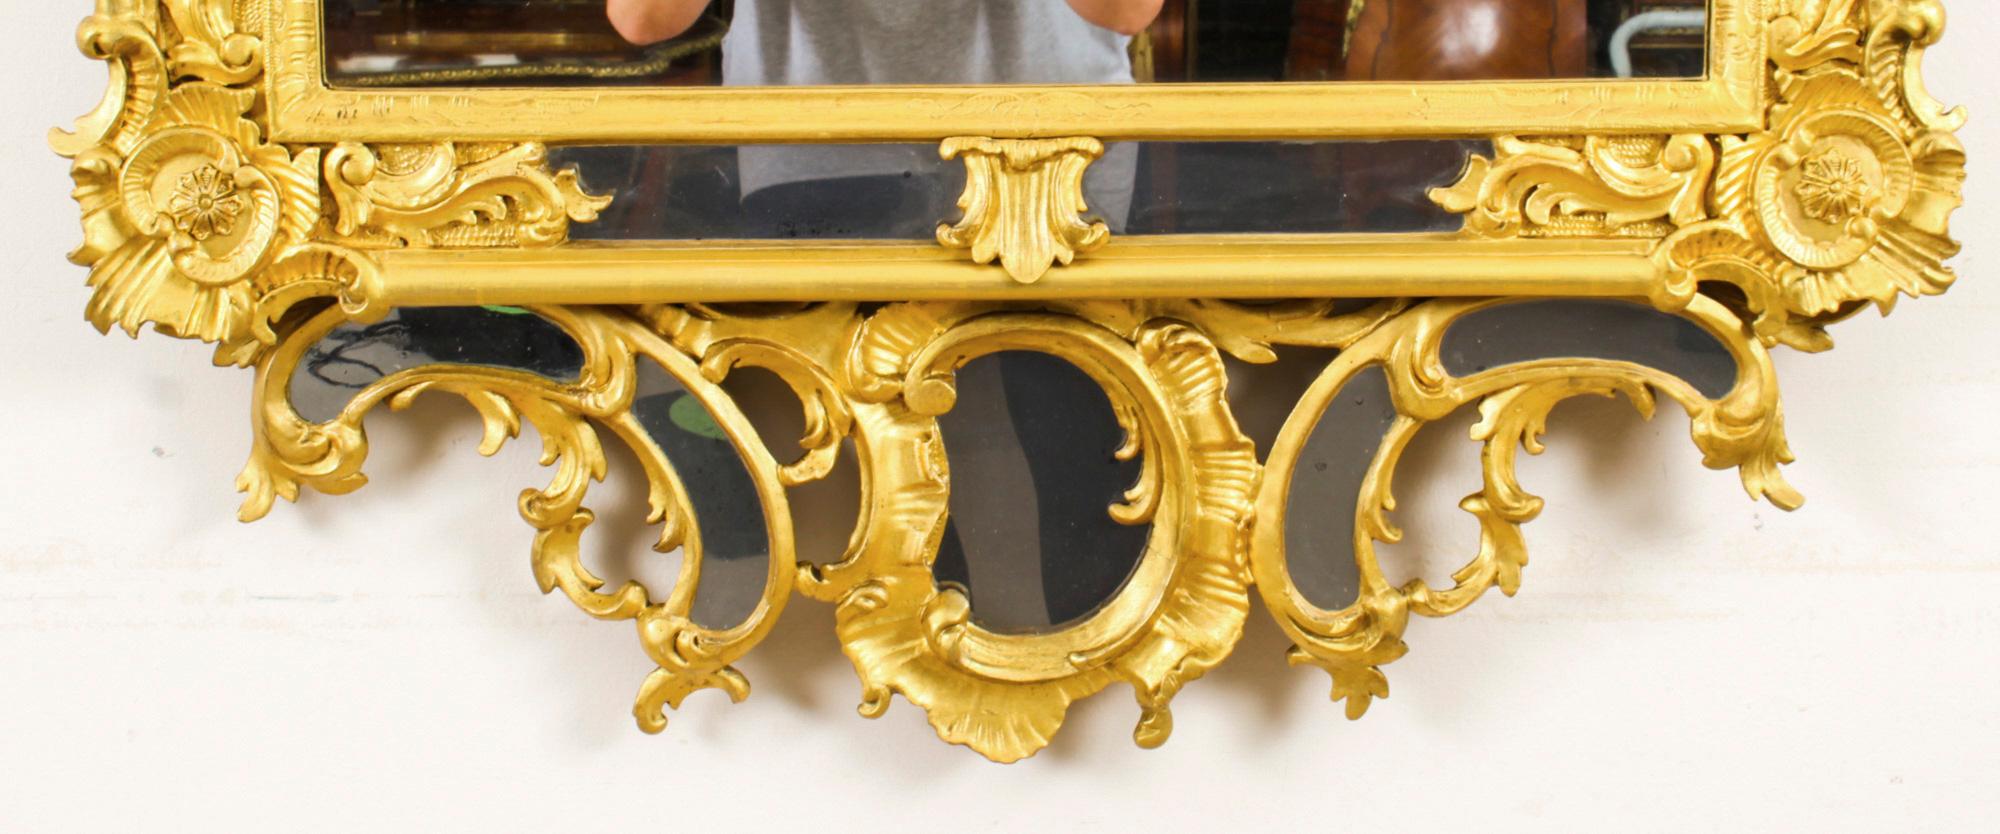 Antique French Giltwood Overmantel Rococo Mirror, 18th Century 5